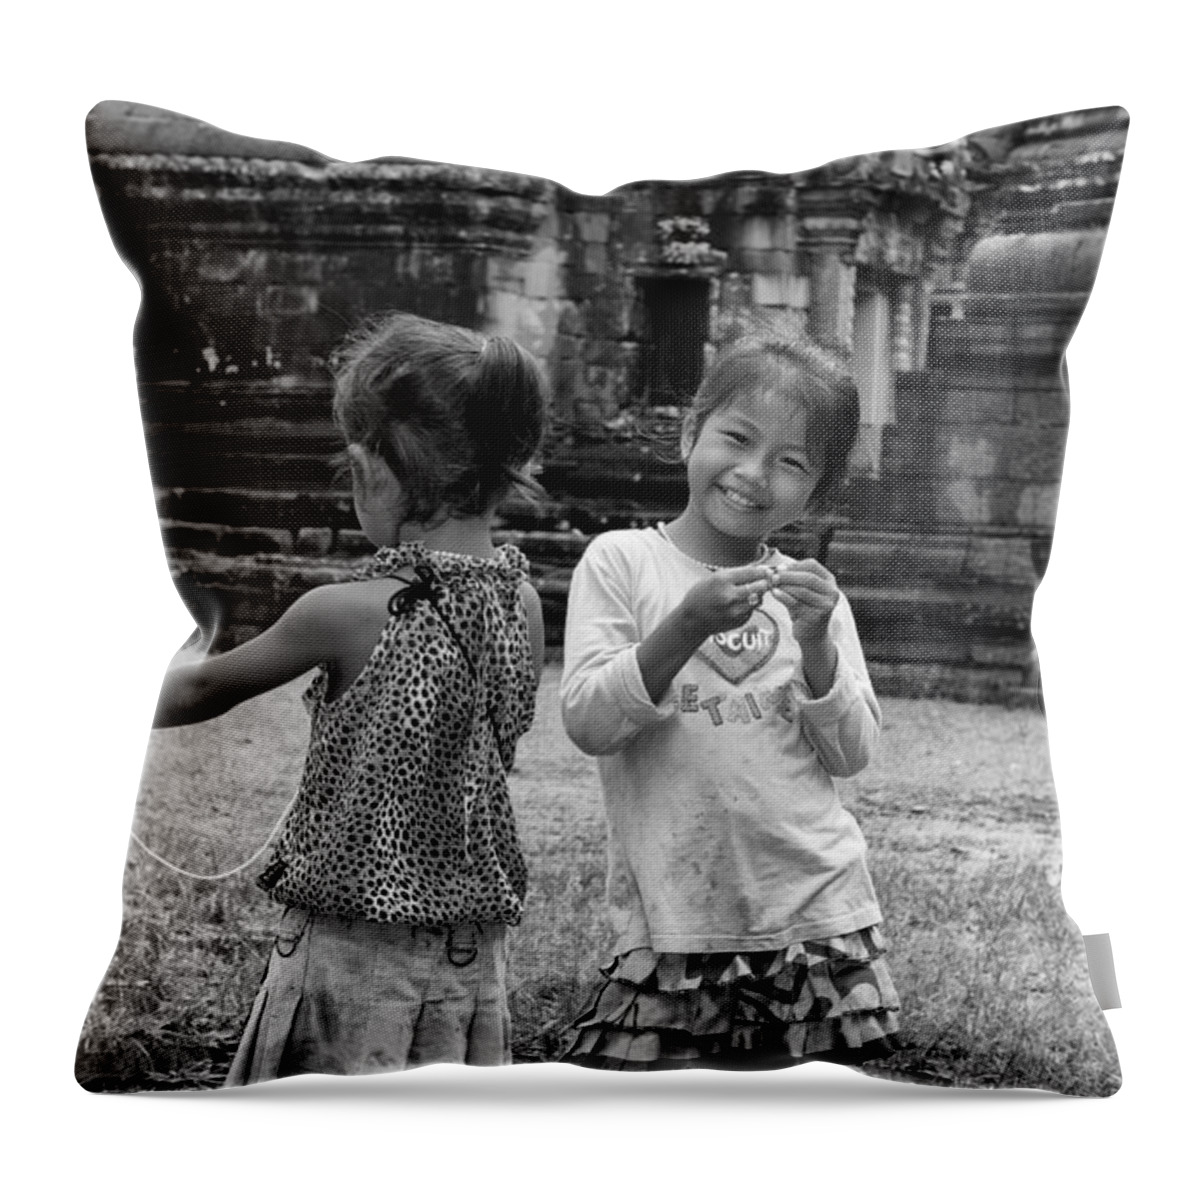 Asia Throw Pillow featuring the photograph Khmer Smile by Joerg Lingnau